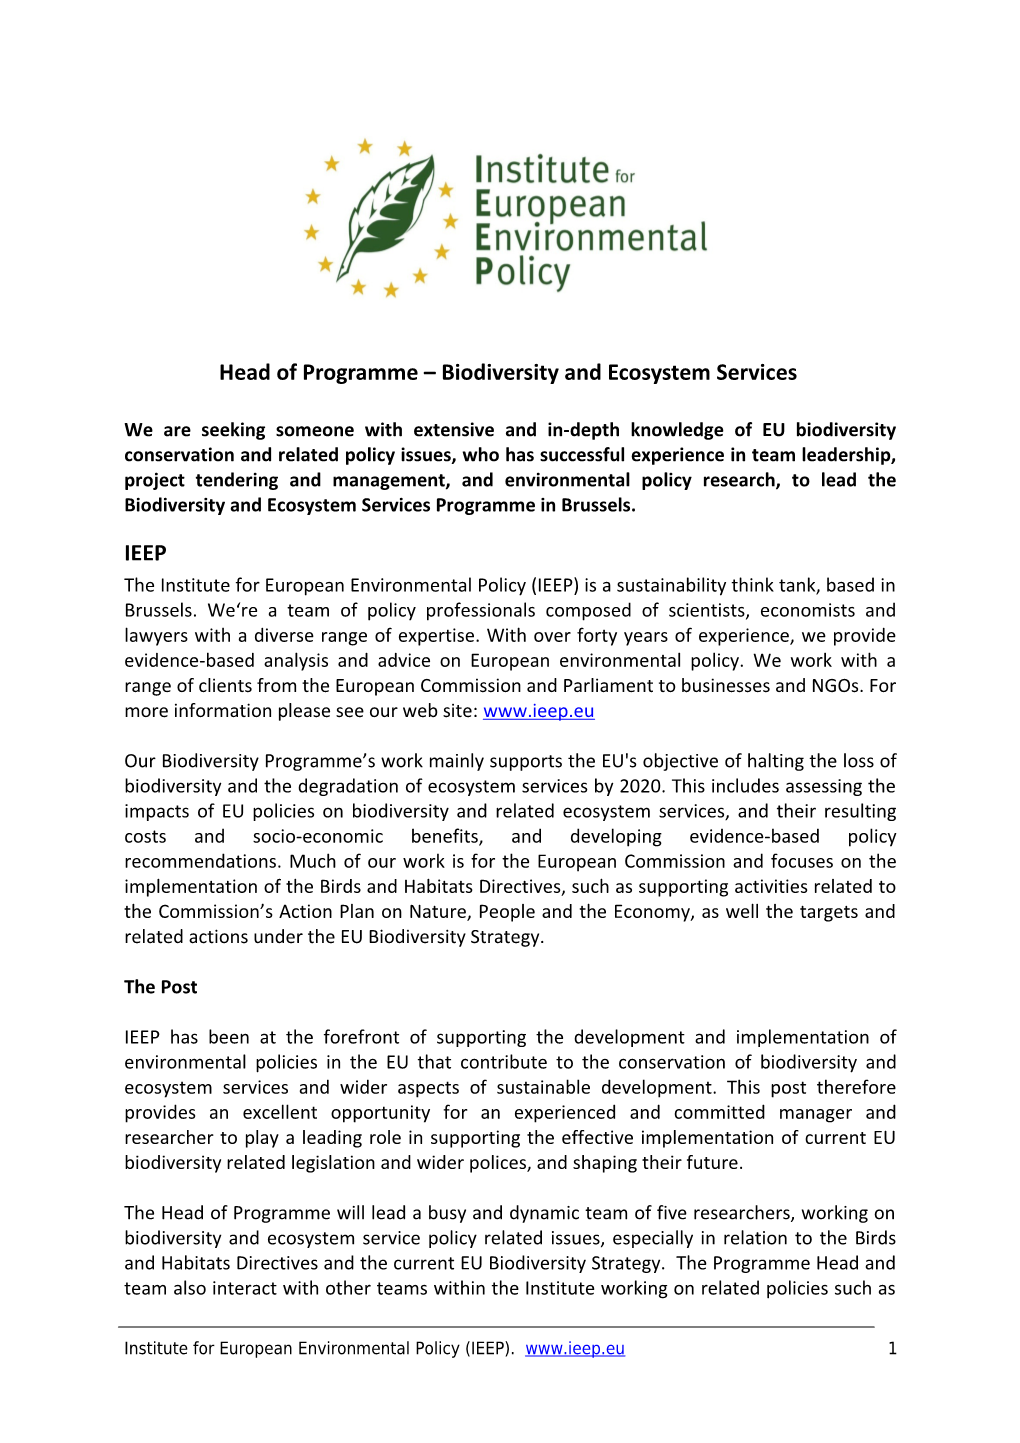 Head of Programme Biodiversity and Ecosystem Services